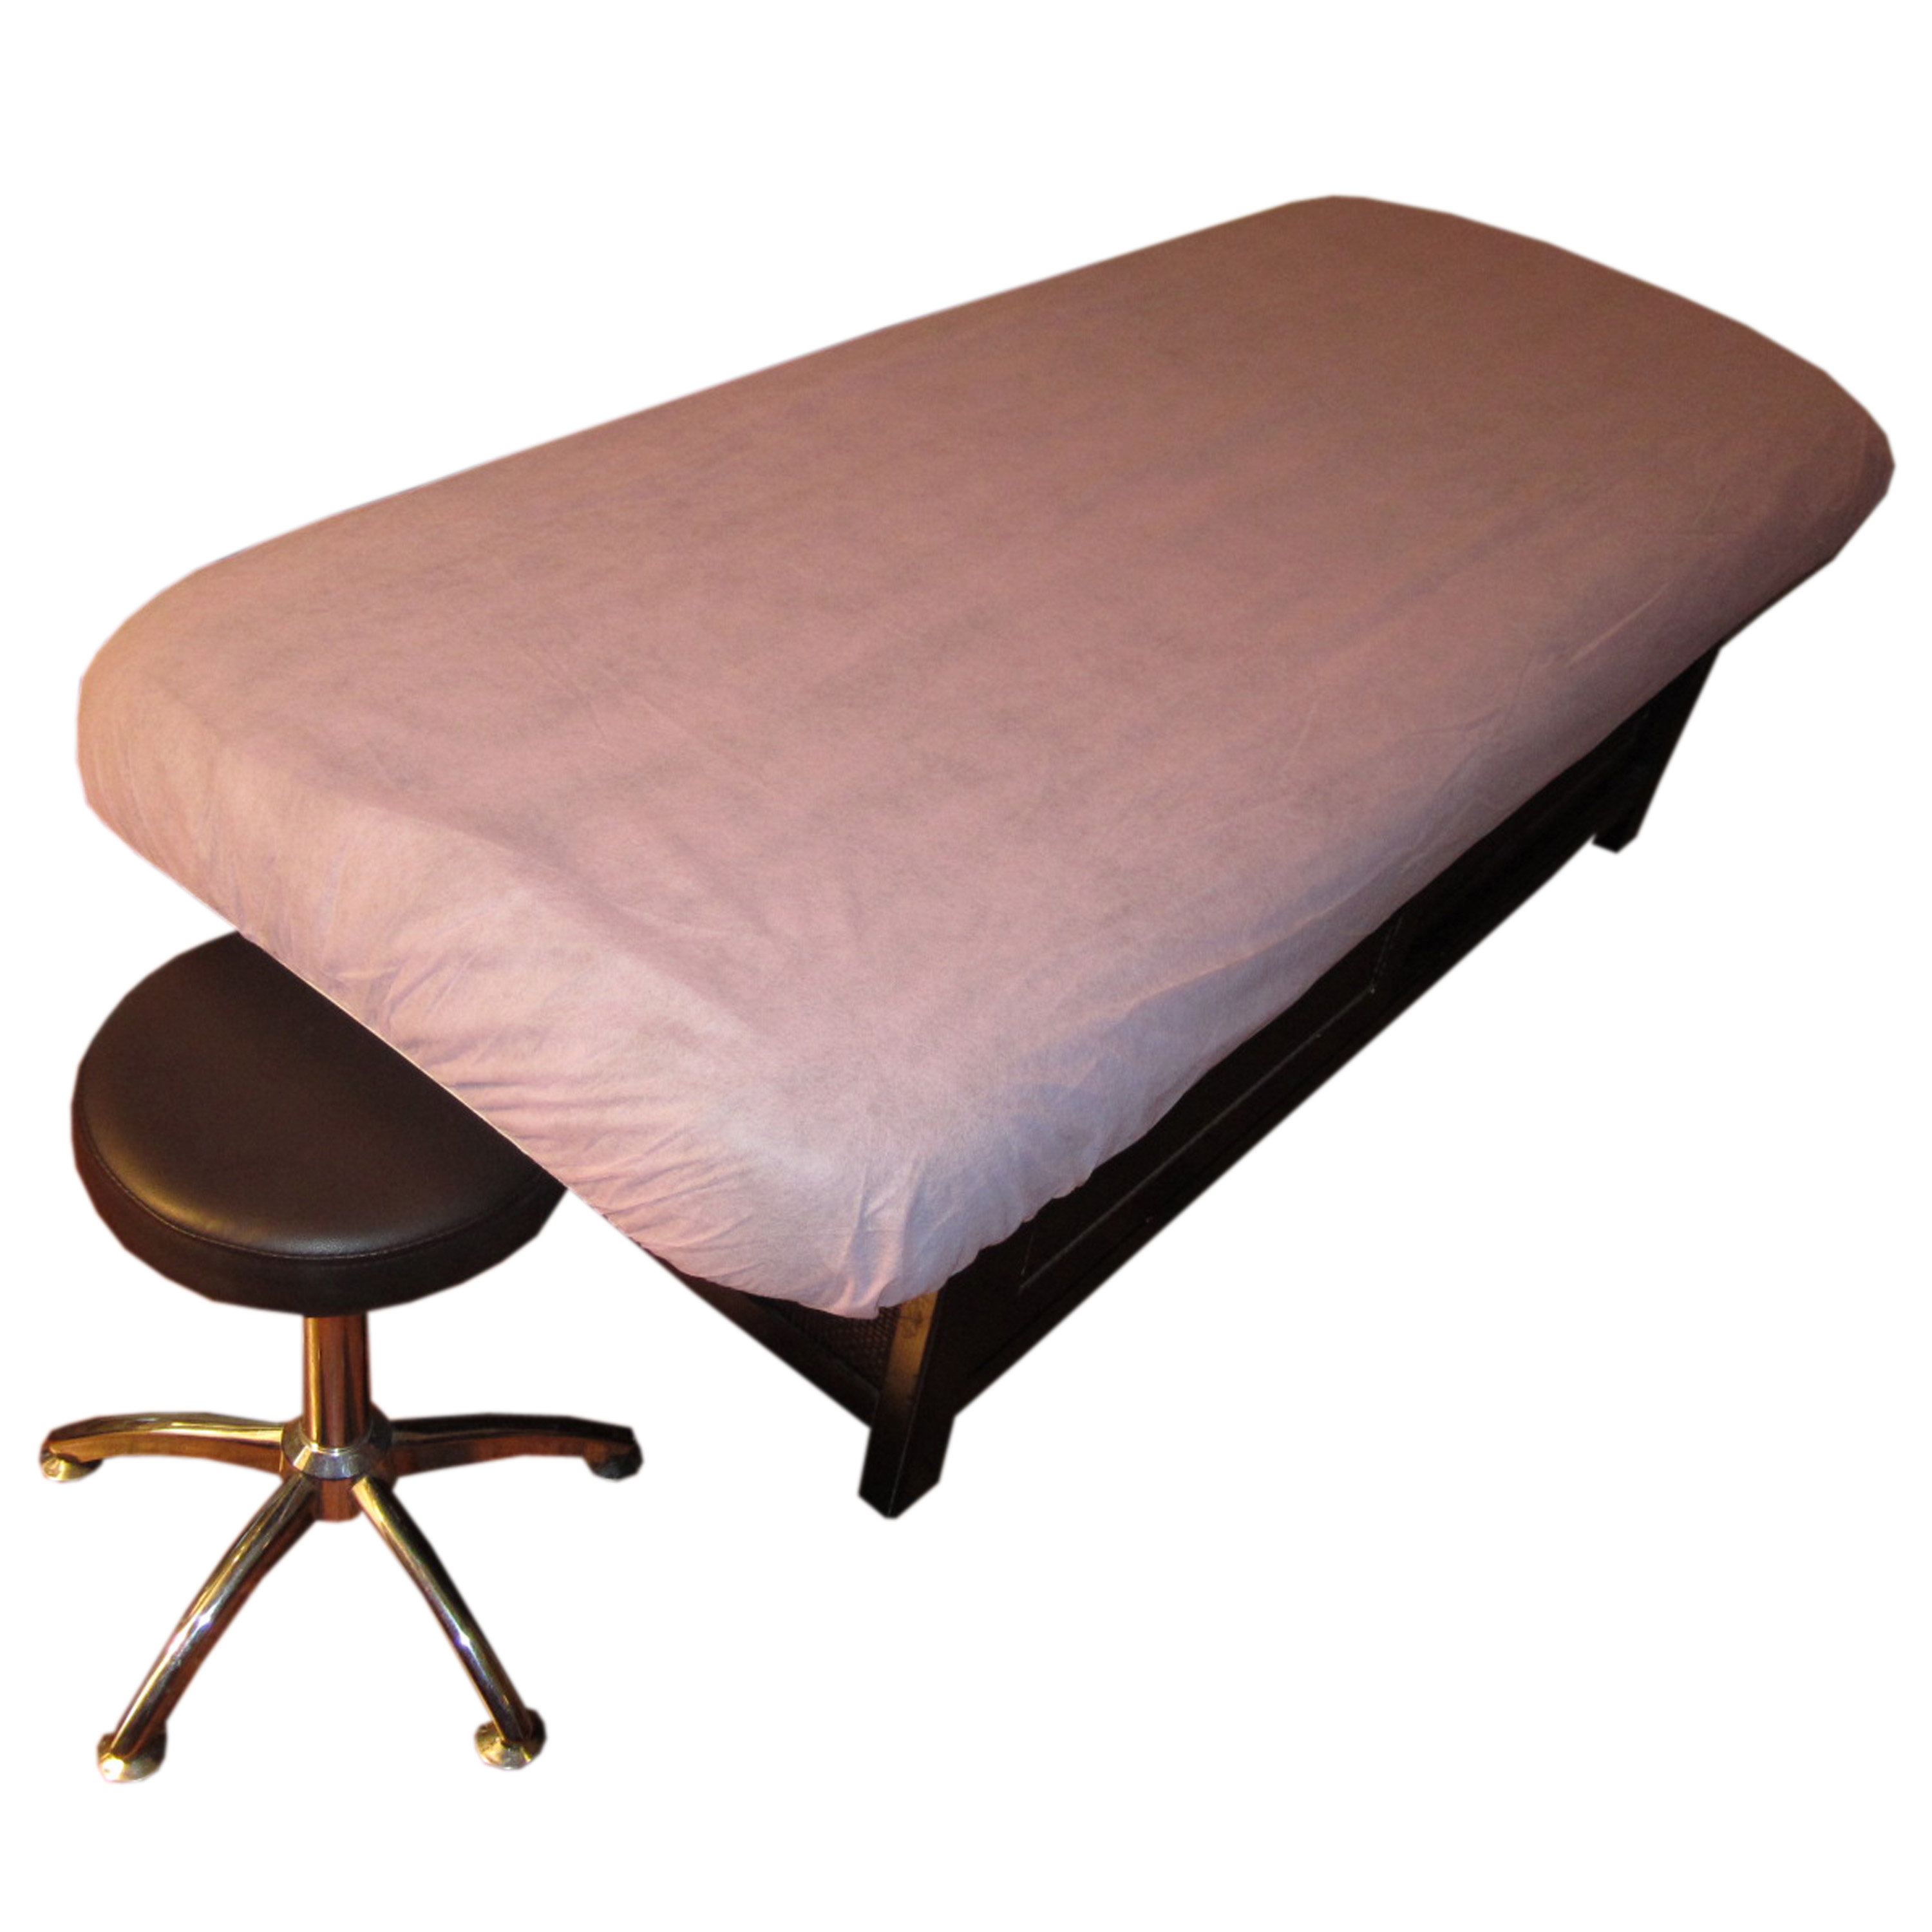 Disposable beauty salon use nonwoven bed cover with ties